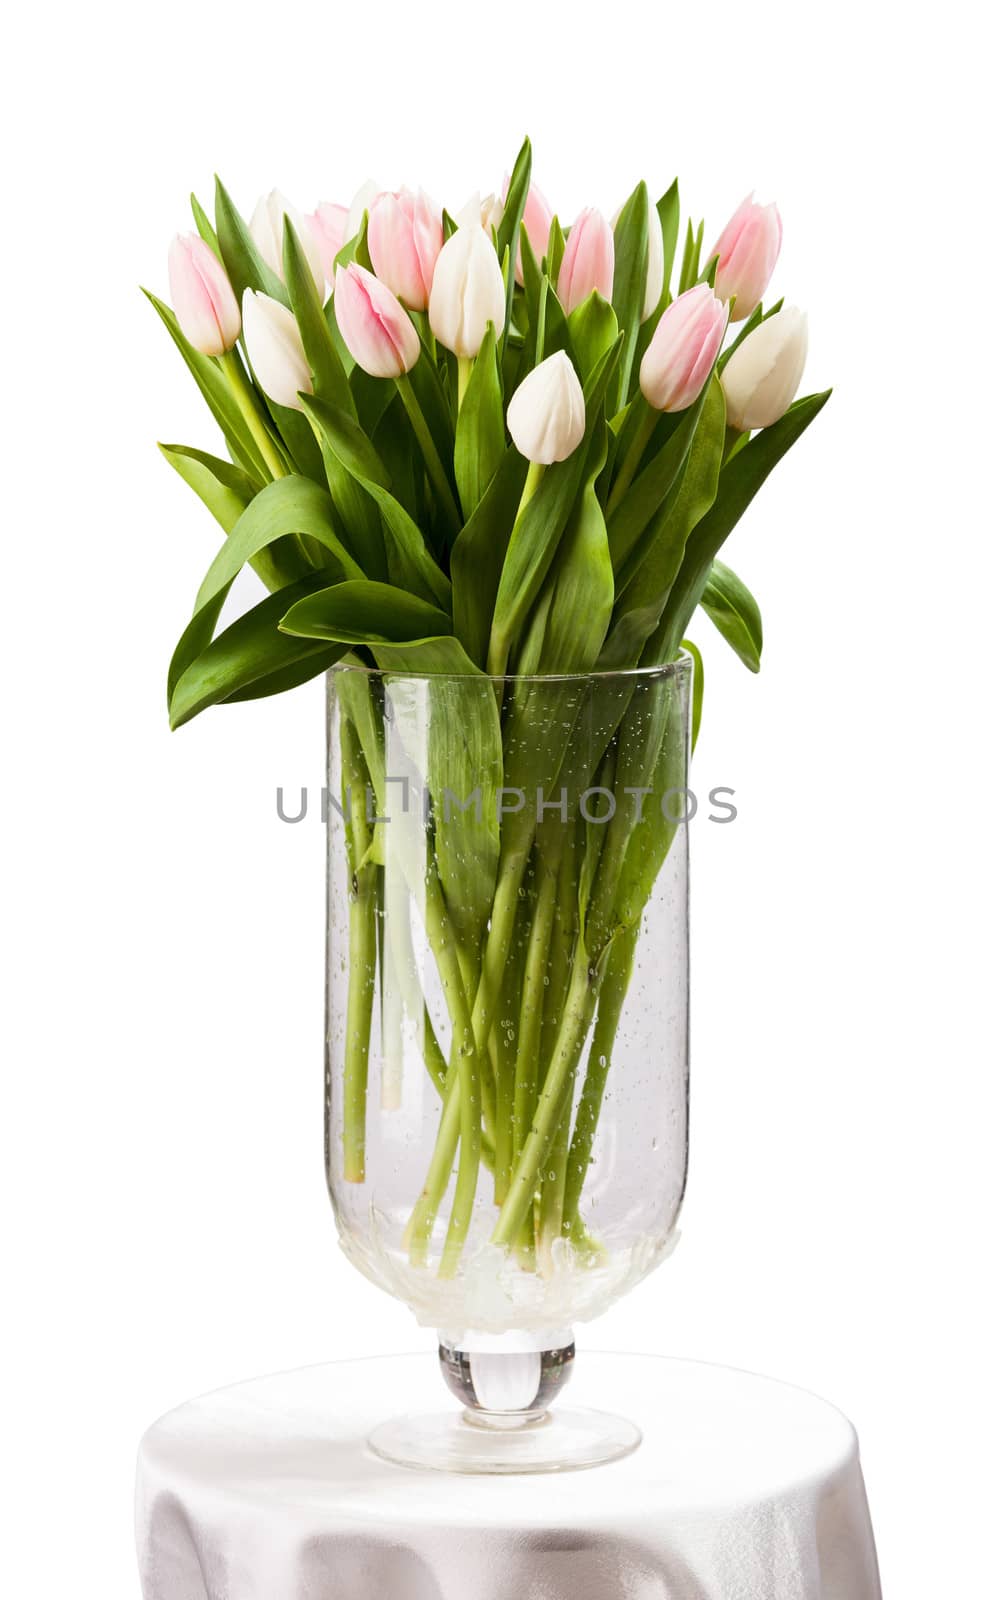 Pink and white tulips bouquet in vase over white by photobac